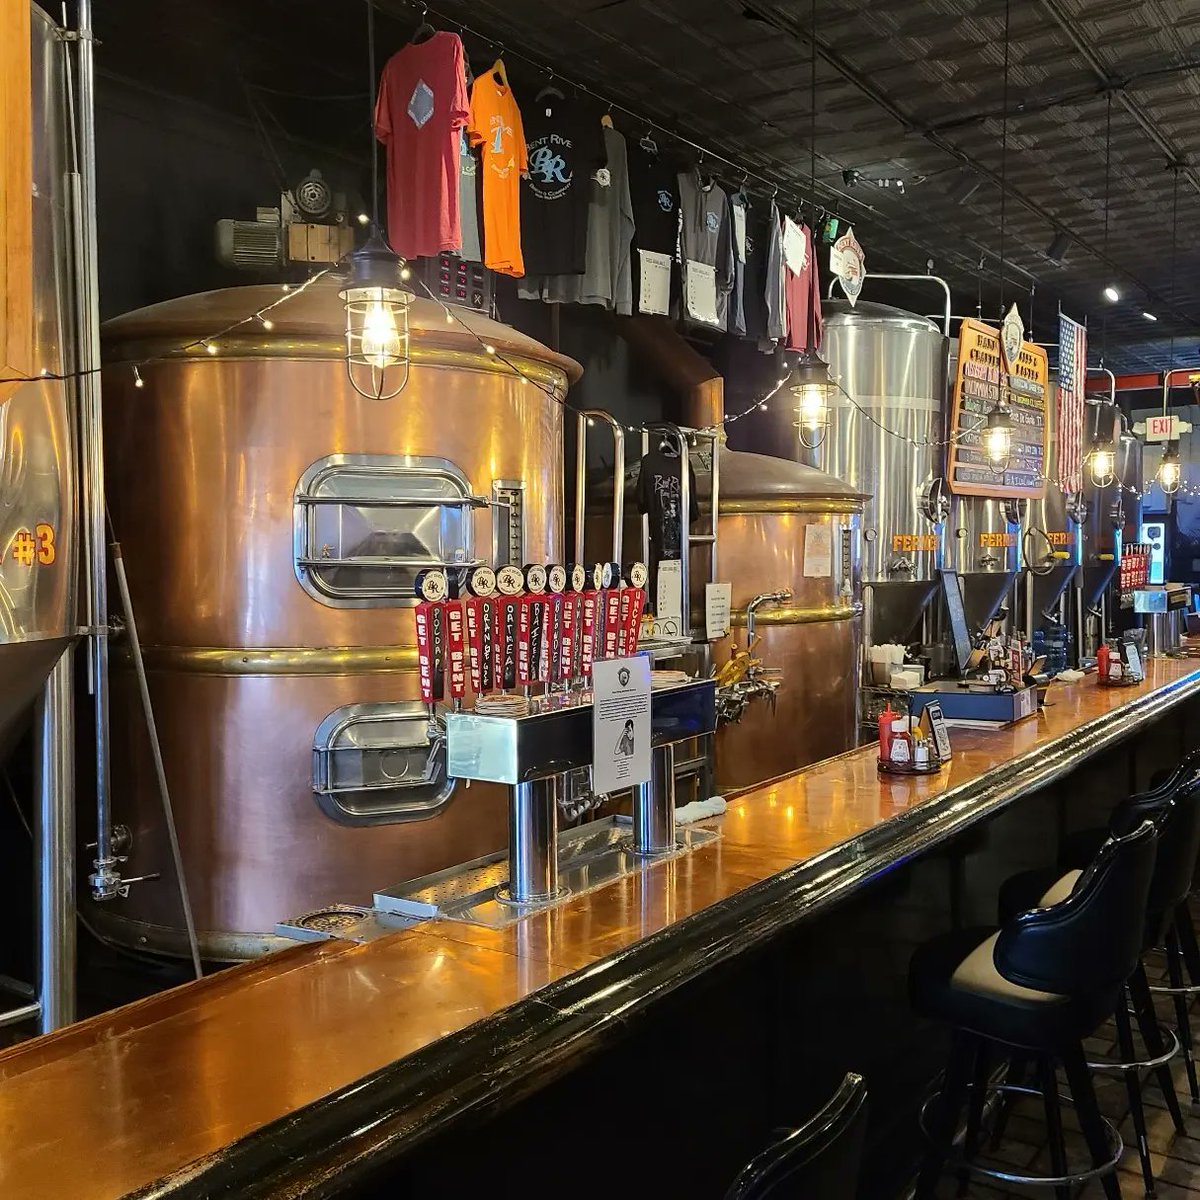 On this week's episode of the Northwoods Beer Guy Podcast, we are on location at Bent River Brewing in the historic area of Moline, IL. This is a must visit place!!! #craftbeer #beersnob #beerme #craftbeerenthusiast #craftbeerlife #craftbeerlover #craftbeersnob #bentriverbrewery